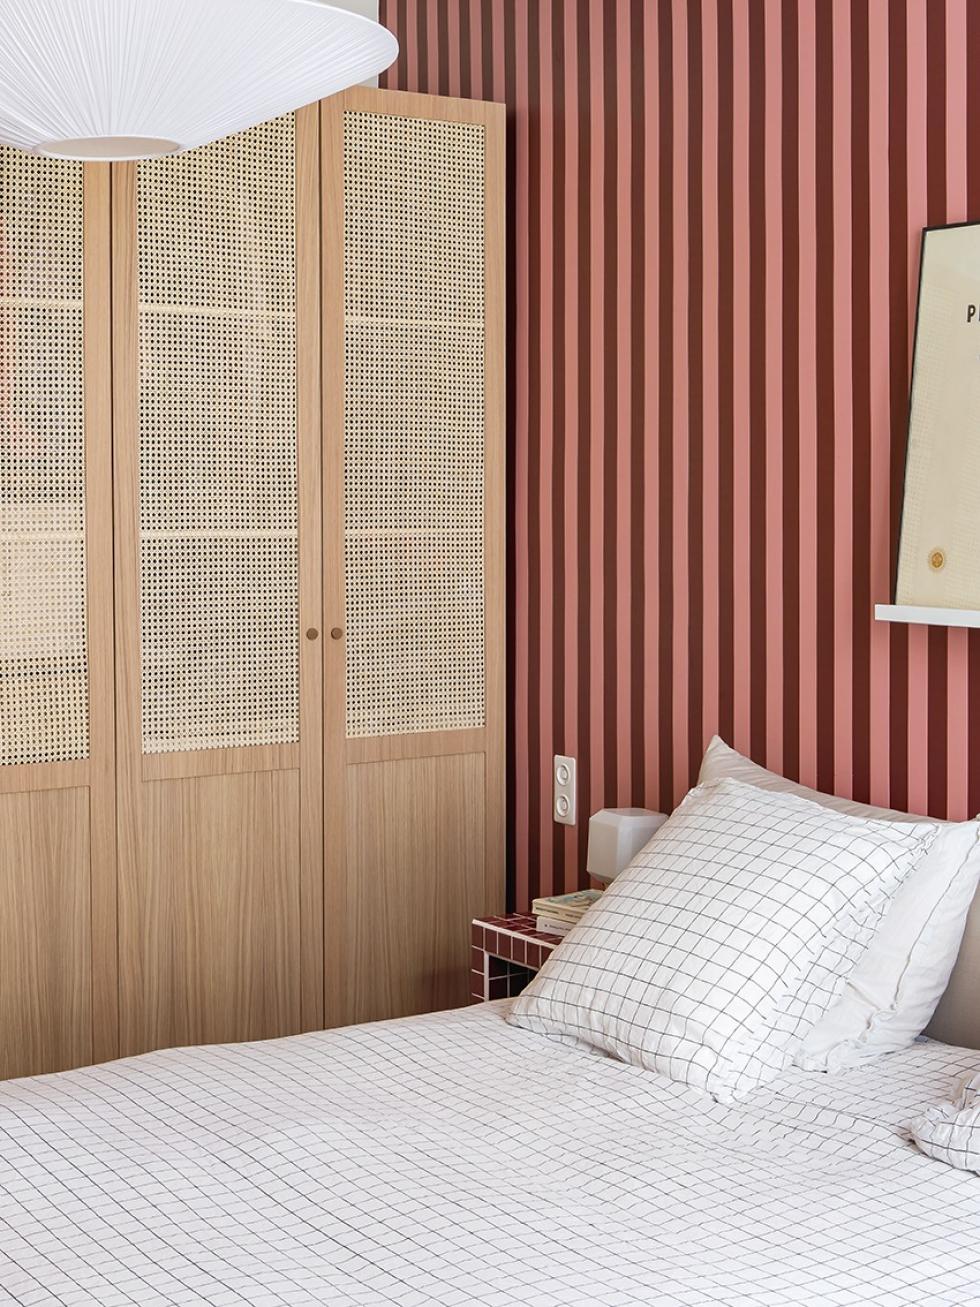 Lisa Gachet's bedroom, with burgundy and pink wallpaper, and a cane and oak wardrobe.